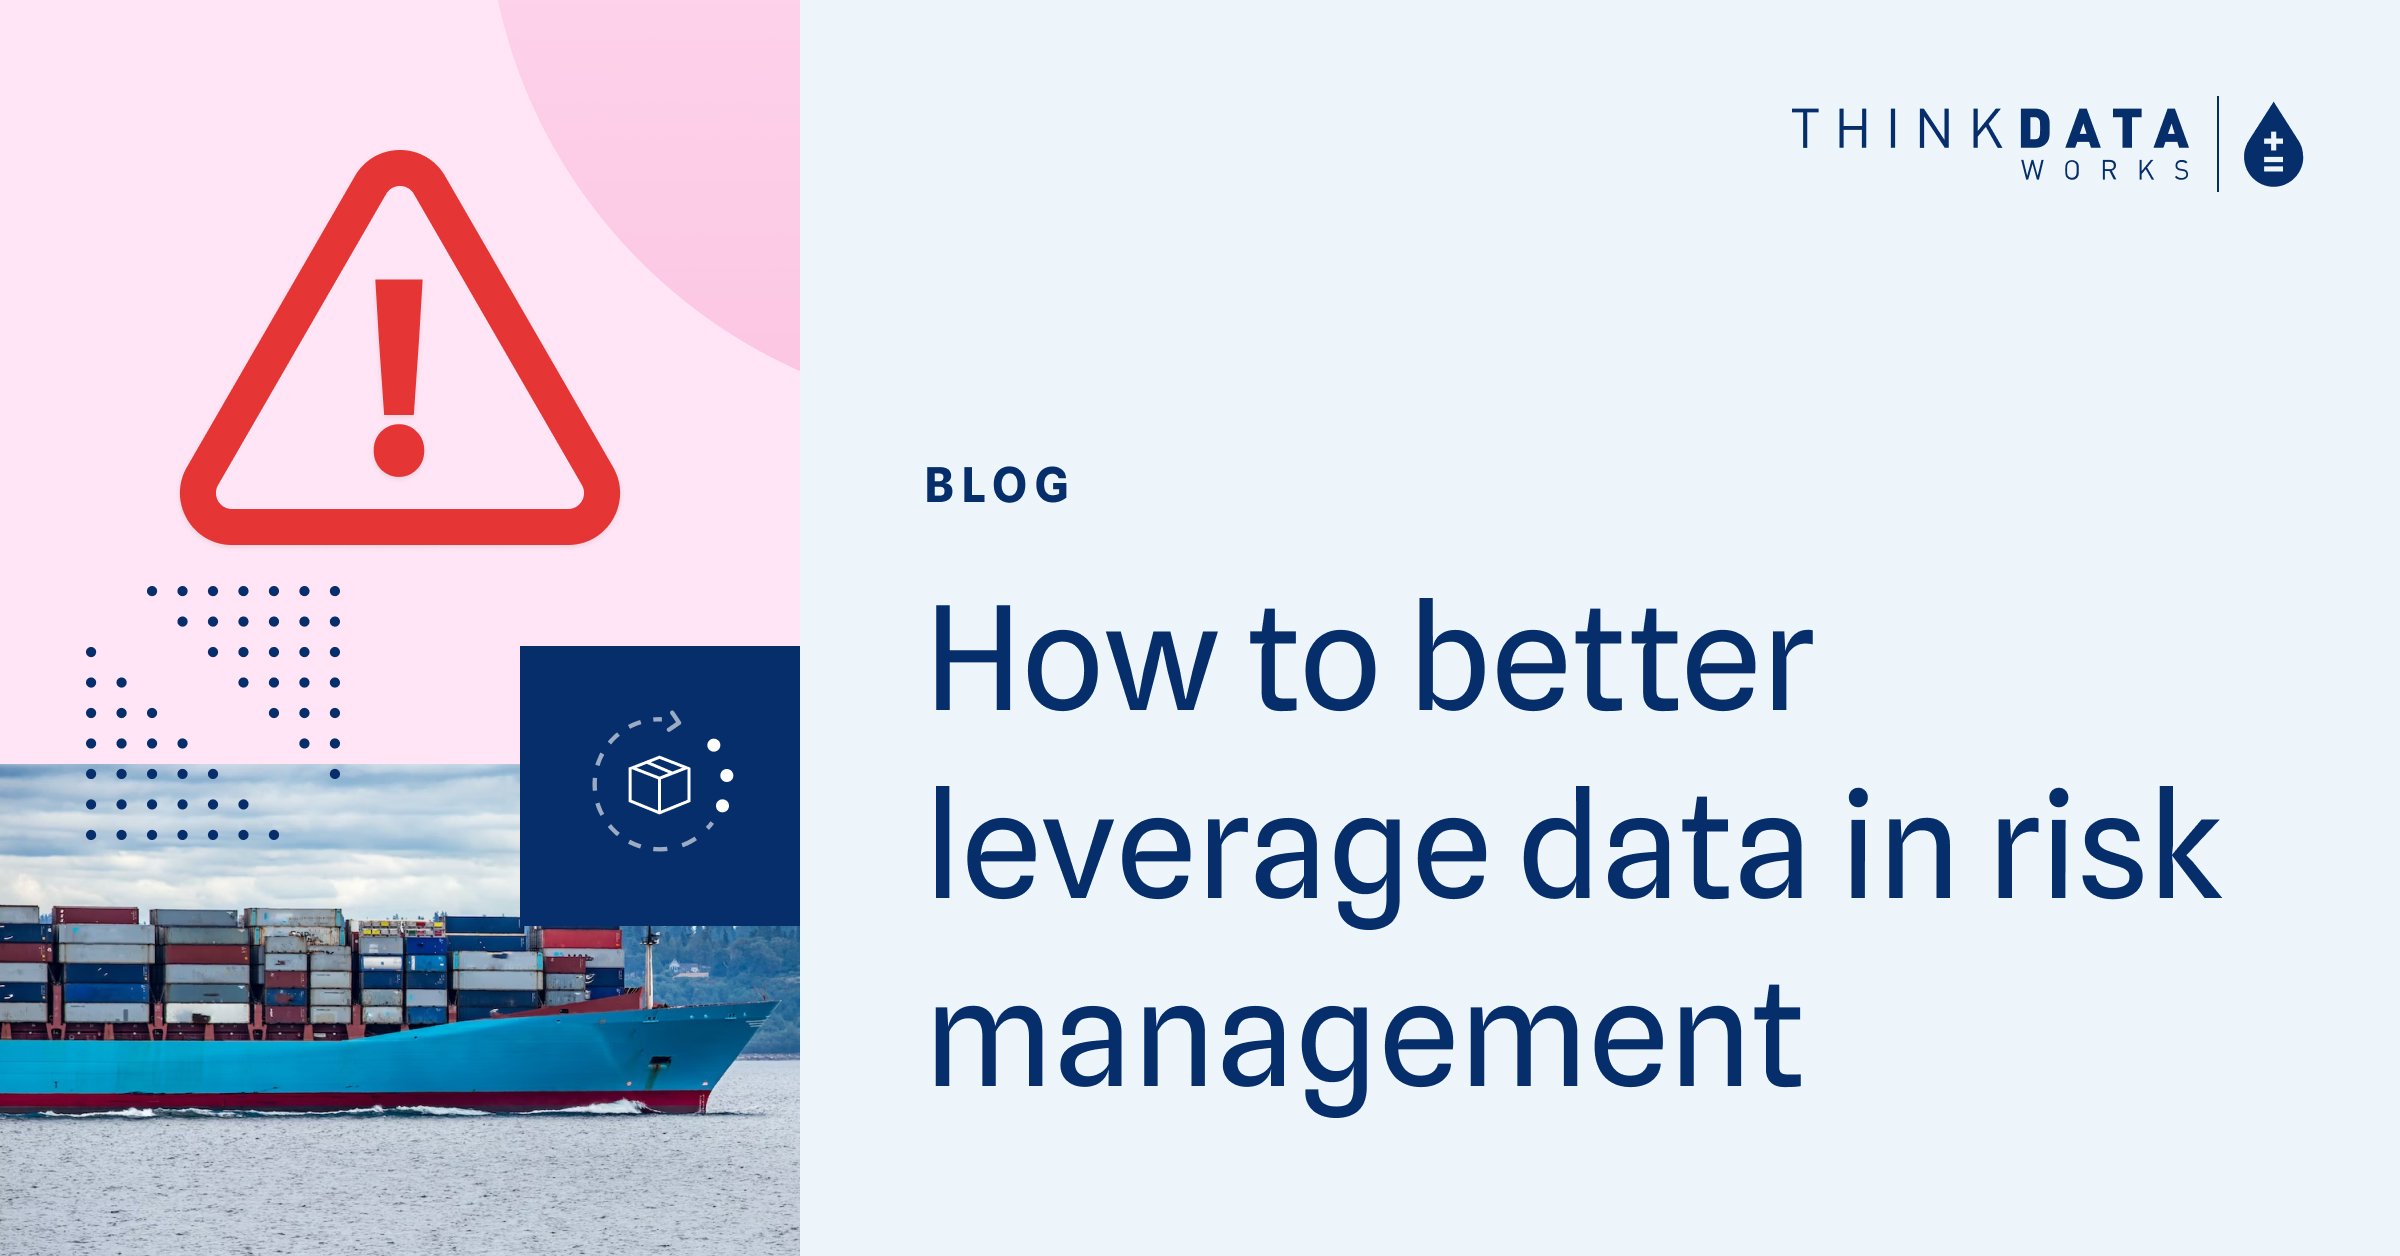 Featured image with a warning sign over a cargo ship and the text: How to better leverage data in risk management